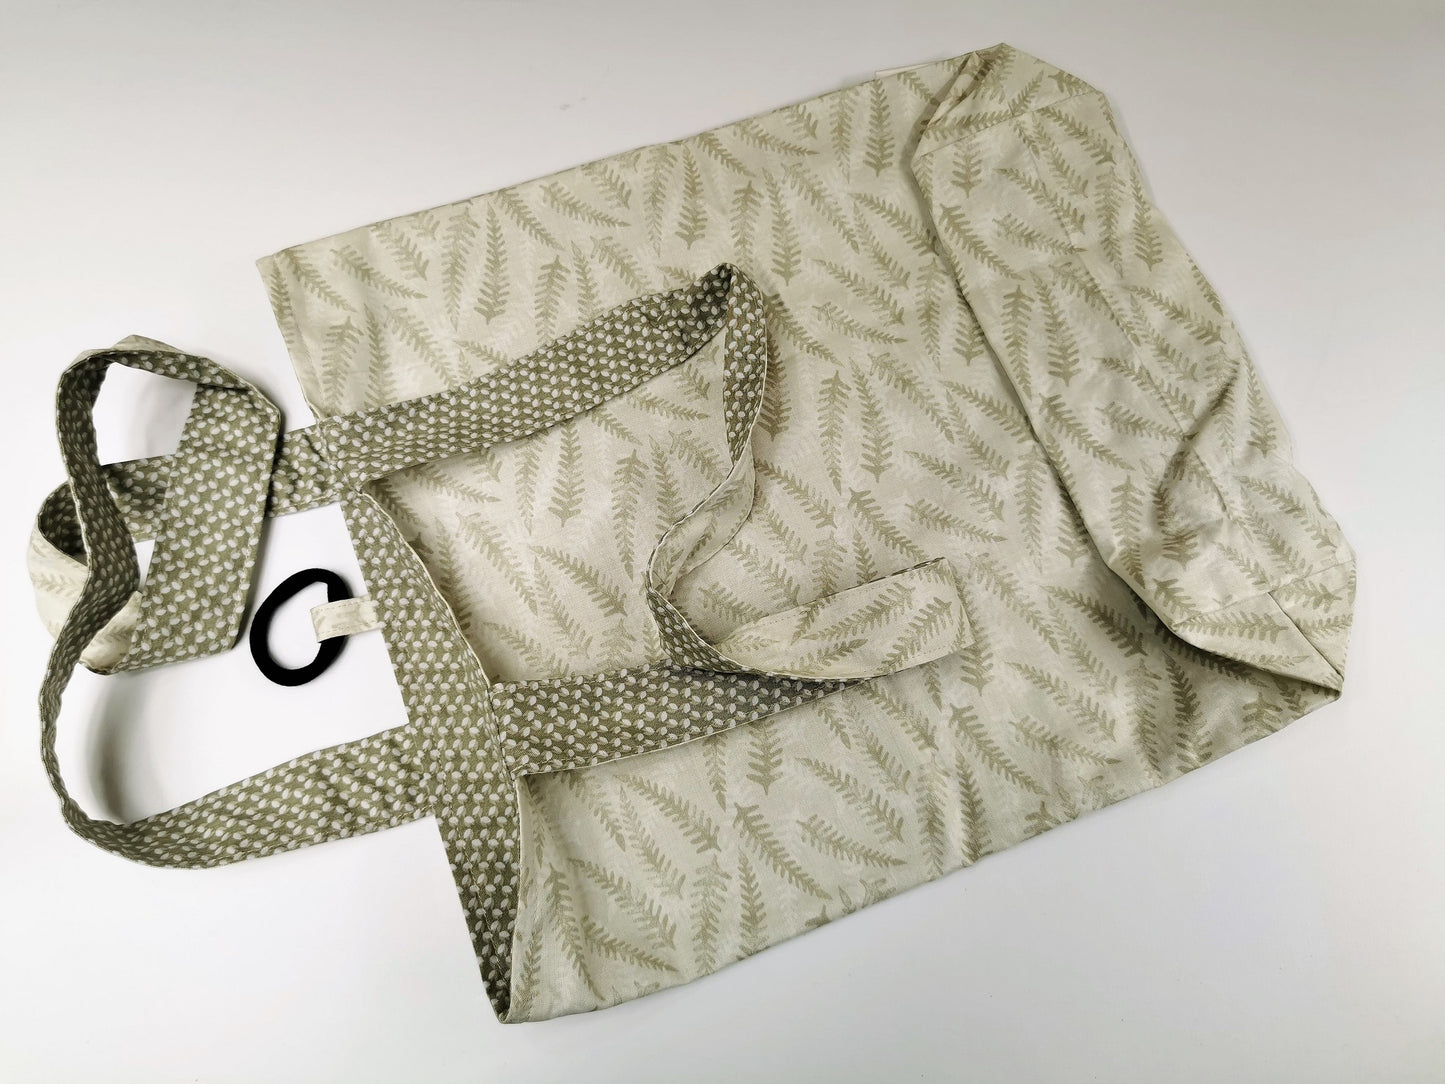 basic tote bag, large reusable cotton shopping bag, compact for purse, sturdy with two layers of fabric, sage green fern leaf fabric